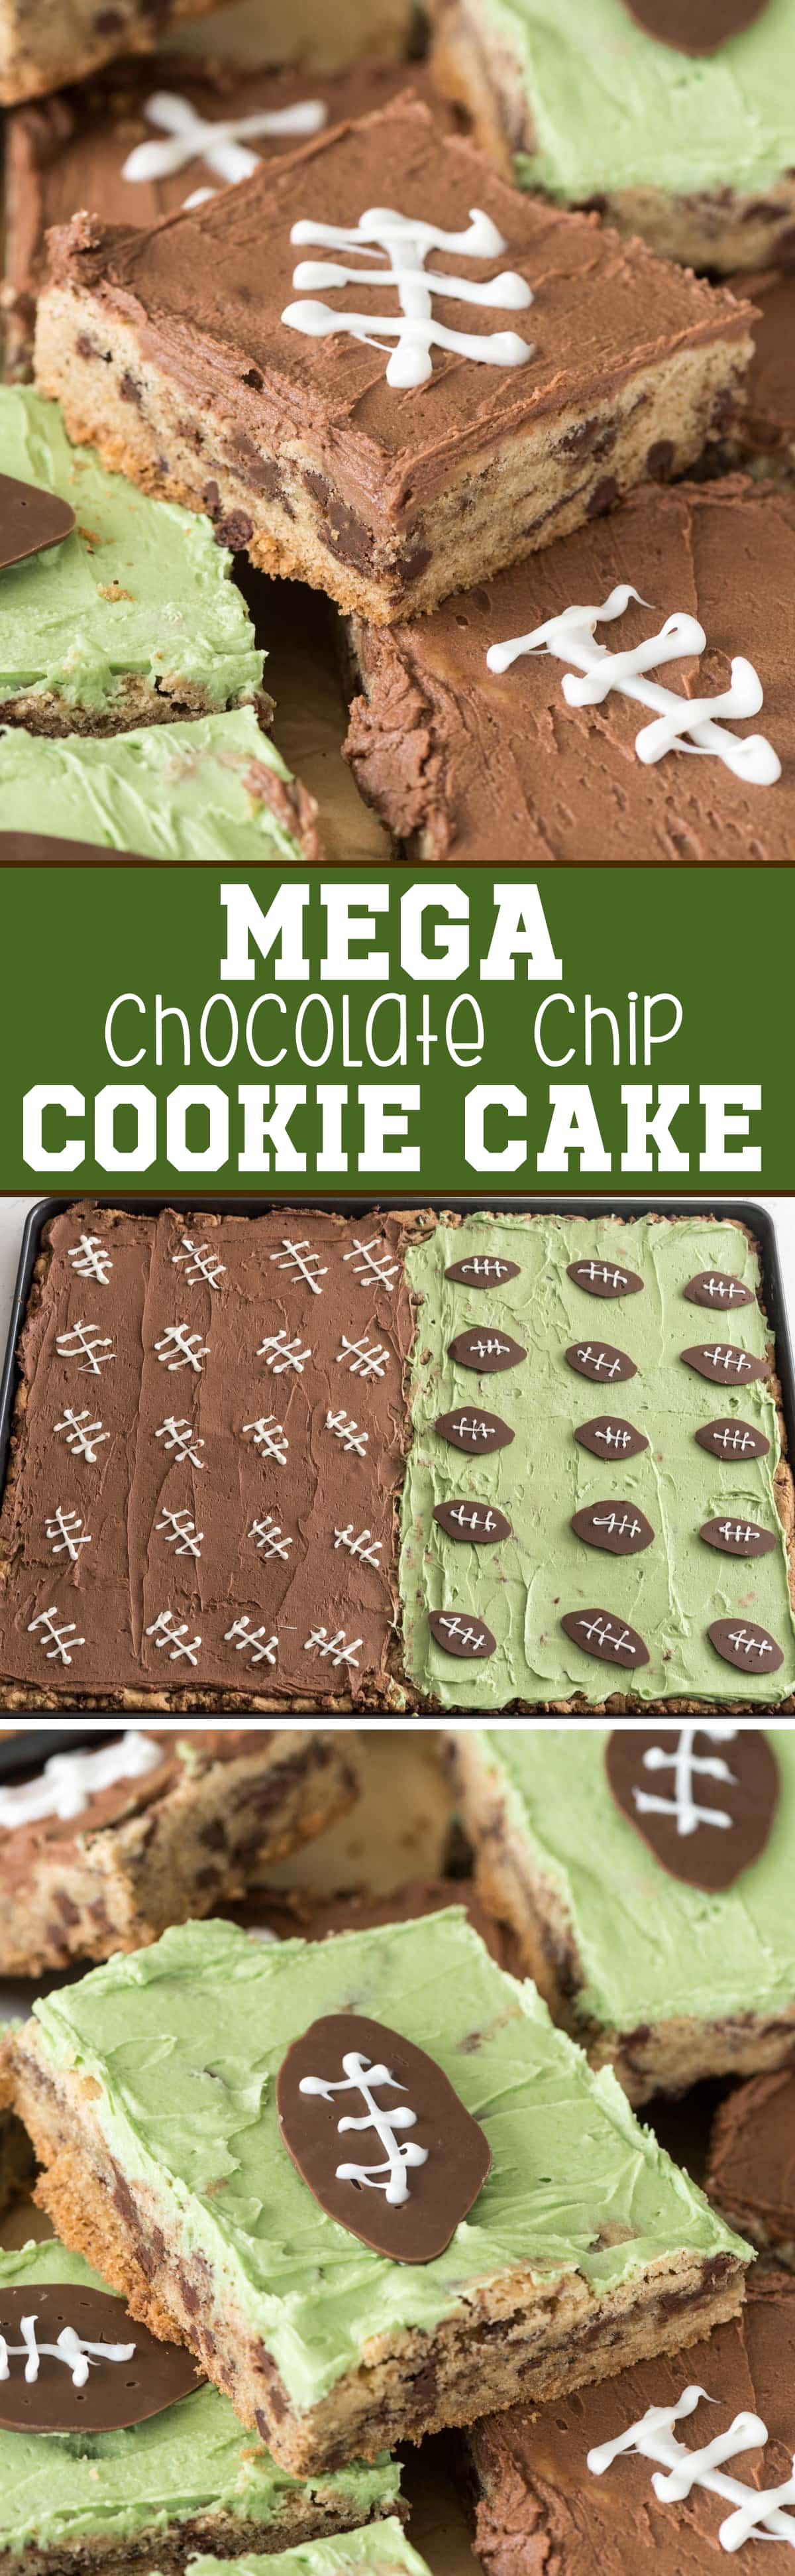 Mega Chocolate Chip Cookie Cake frosted for football season! This easy cookie recipe makes a TON so it's perfect for a party.